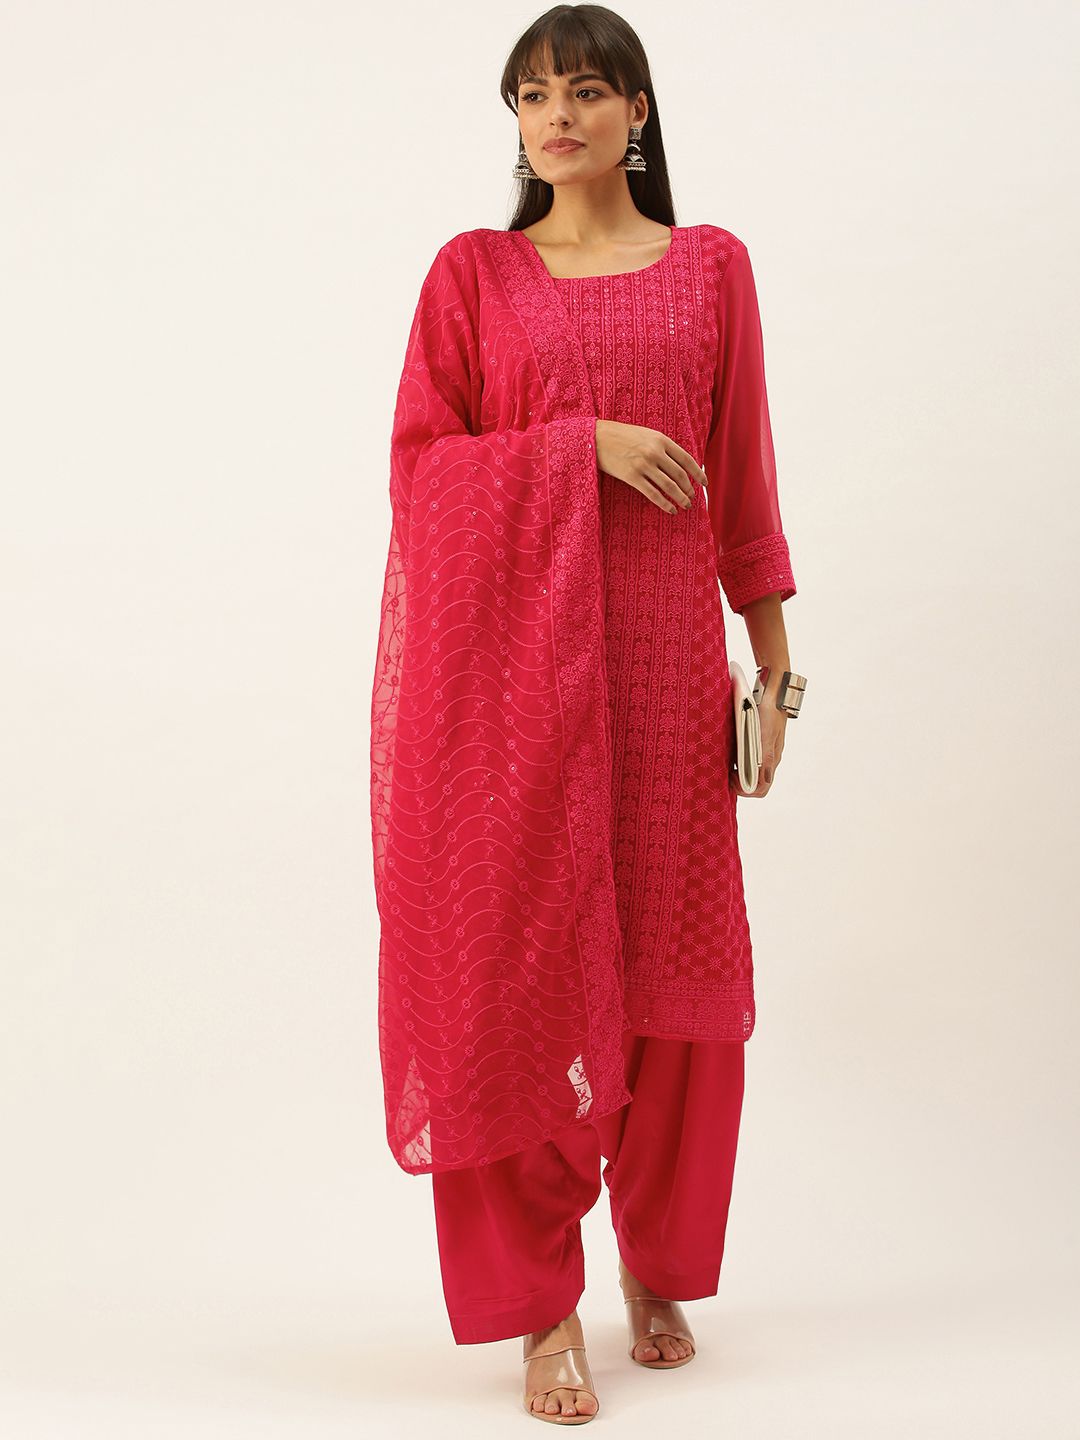 SWAGG INDIA Fuchsia Ethnic Motif Embroidered Unstitched Dress Material Price in India